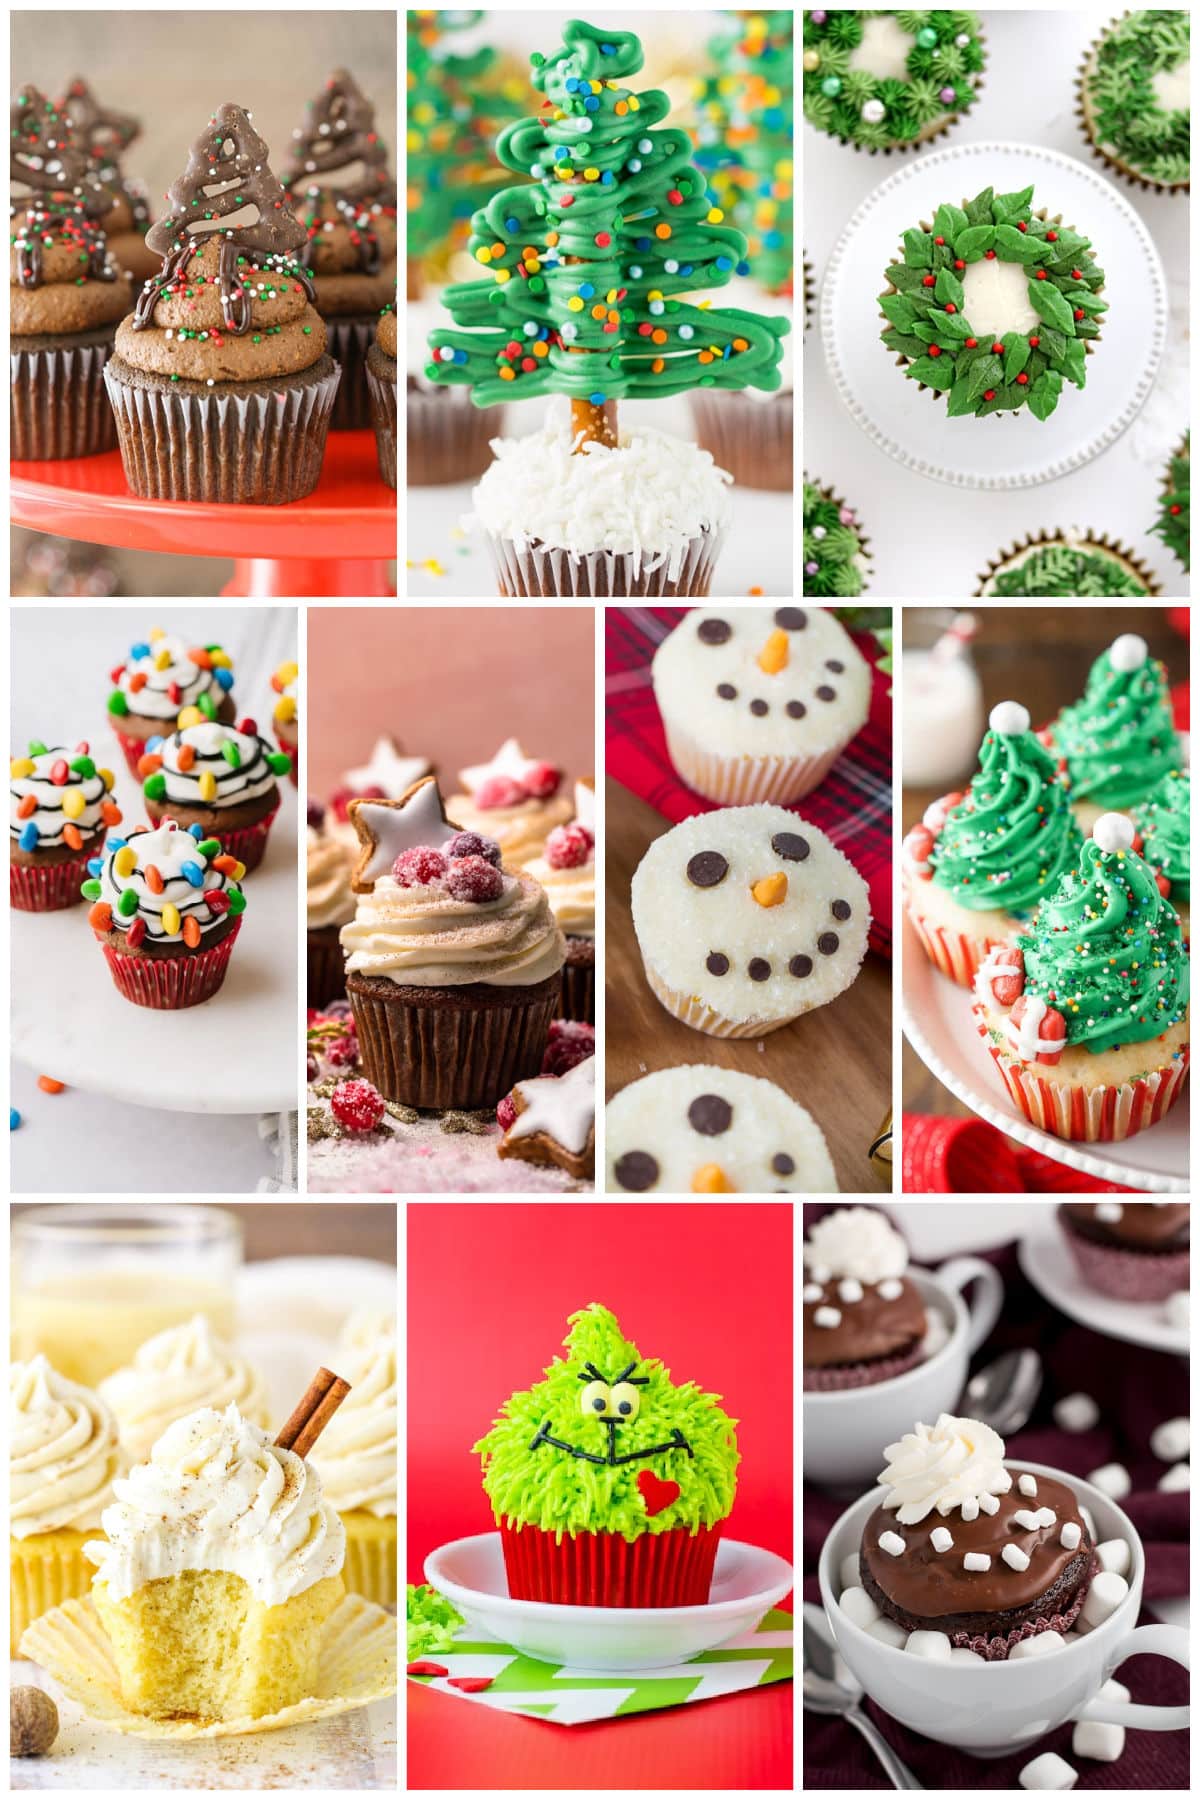 A group of Christmas cupcake recipes including favorites such as snowman cupcakes, Christmas wreath cupcakes and eggnog cupcakes.